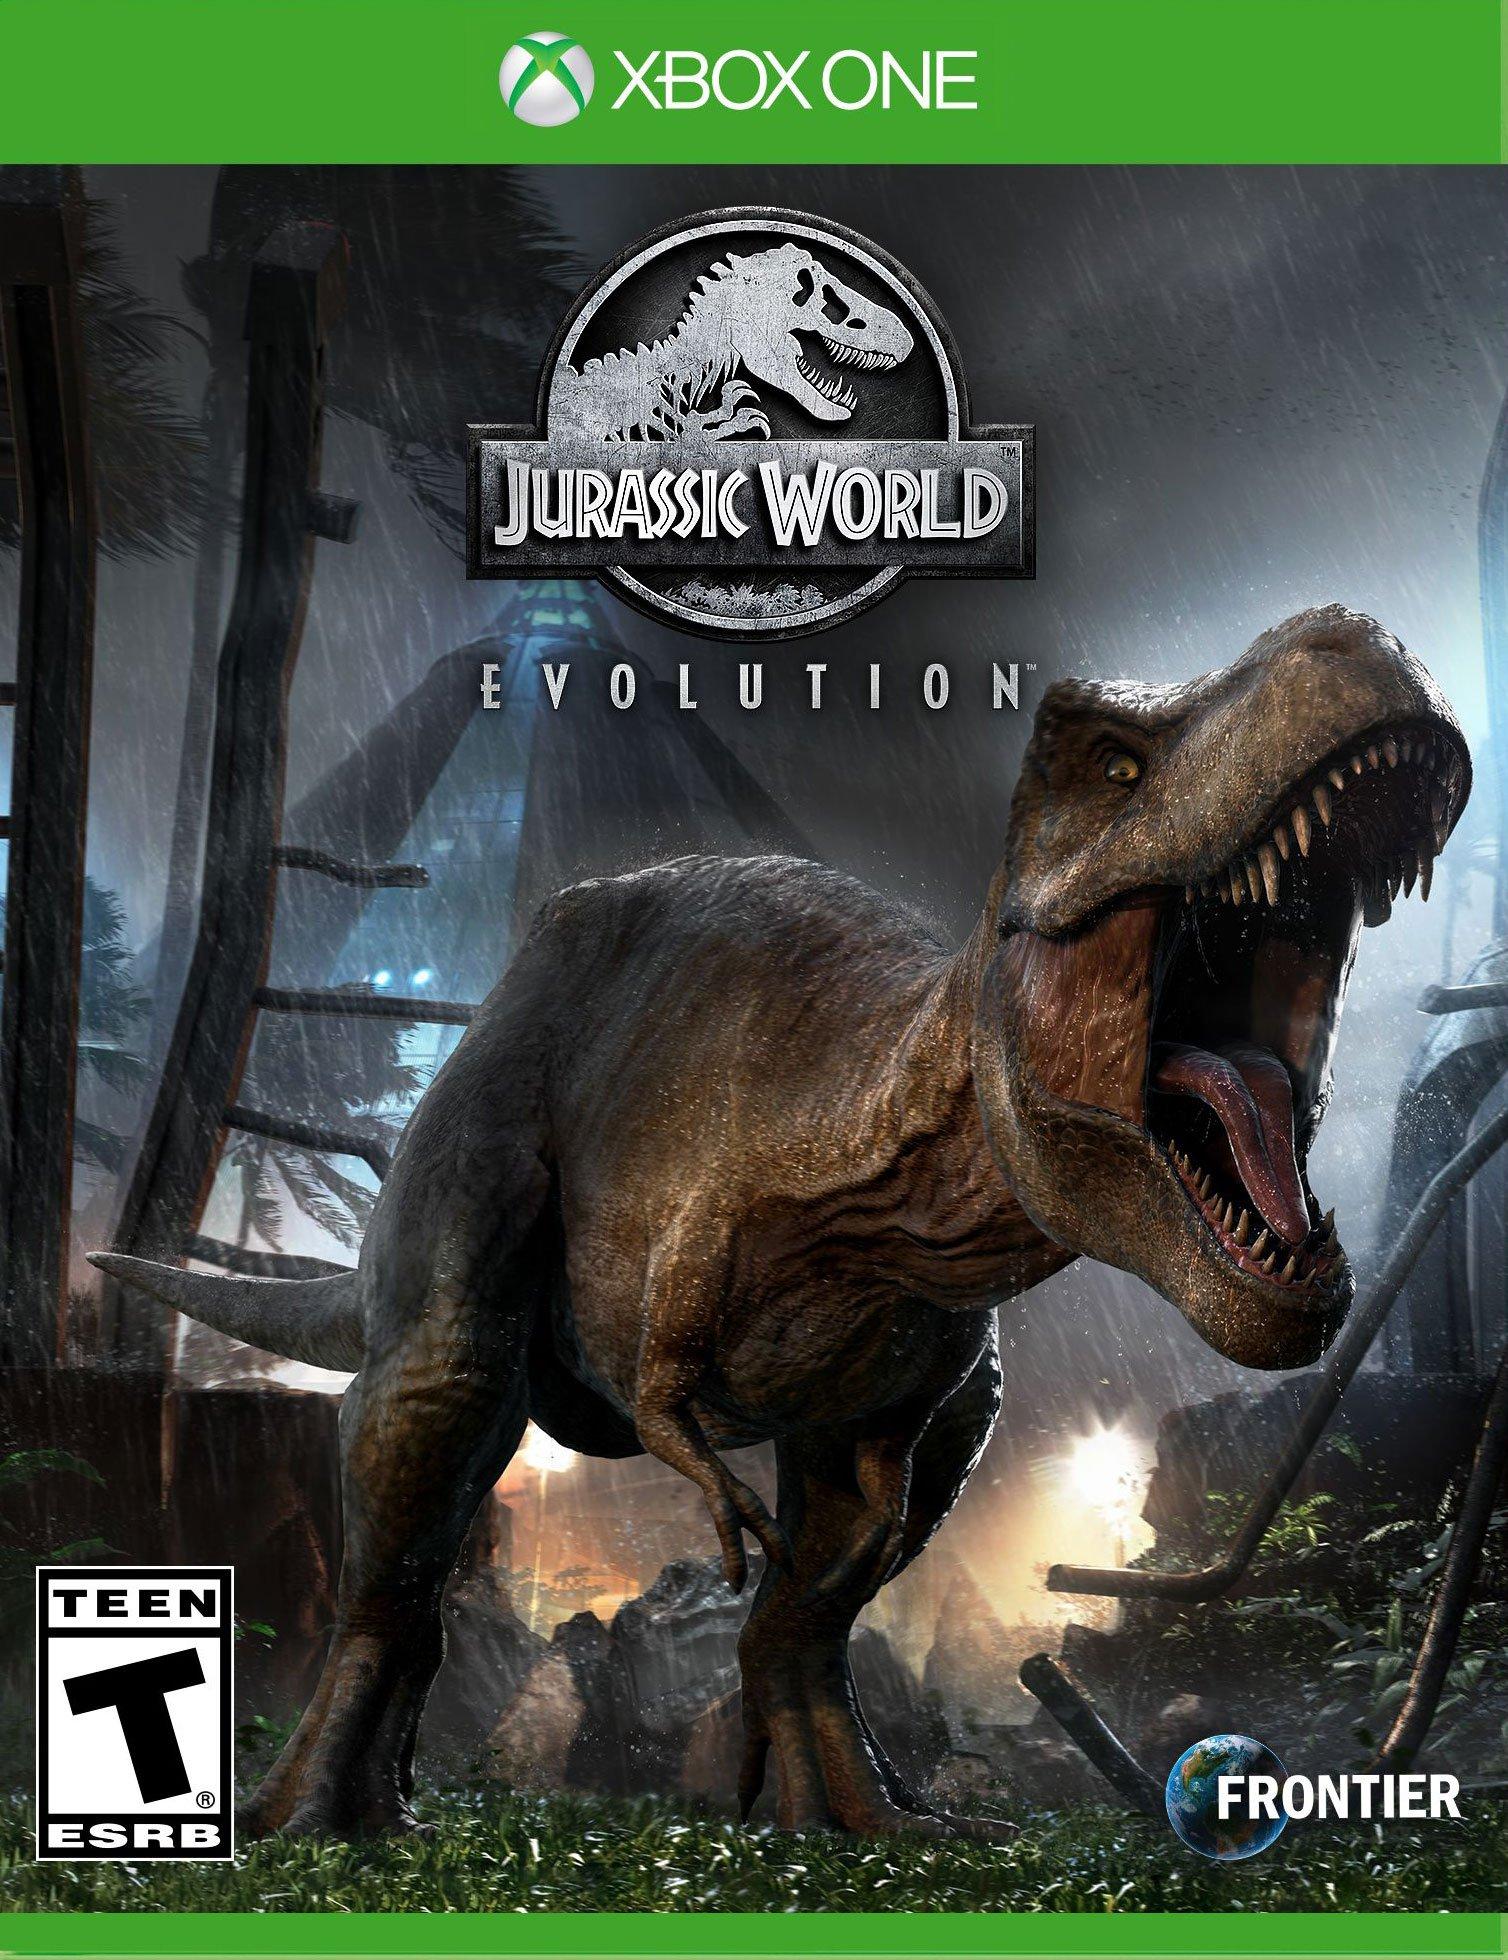  Jurassic Park - The Game - Xbox 360 : Video Games